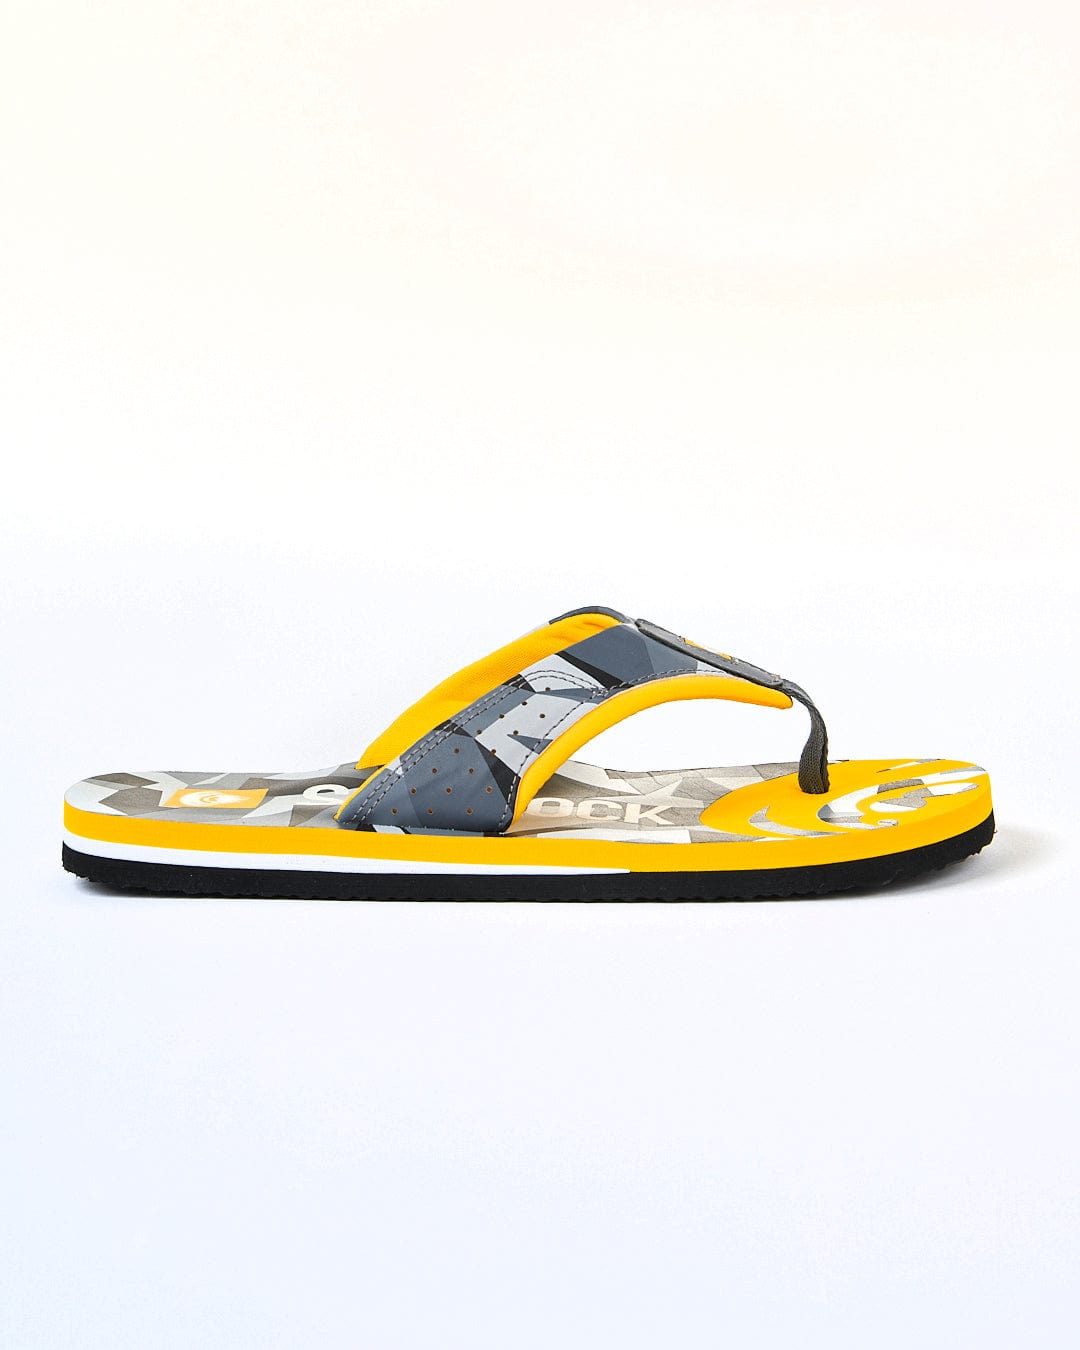 A pair of yellow and dark grey Camo Corp flip flops with Saltrock branding on a white background.